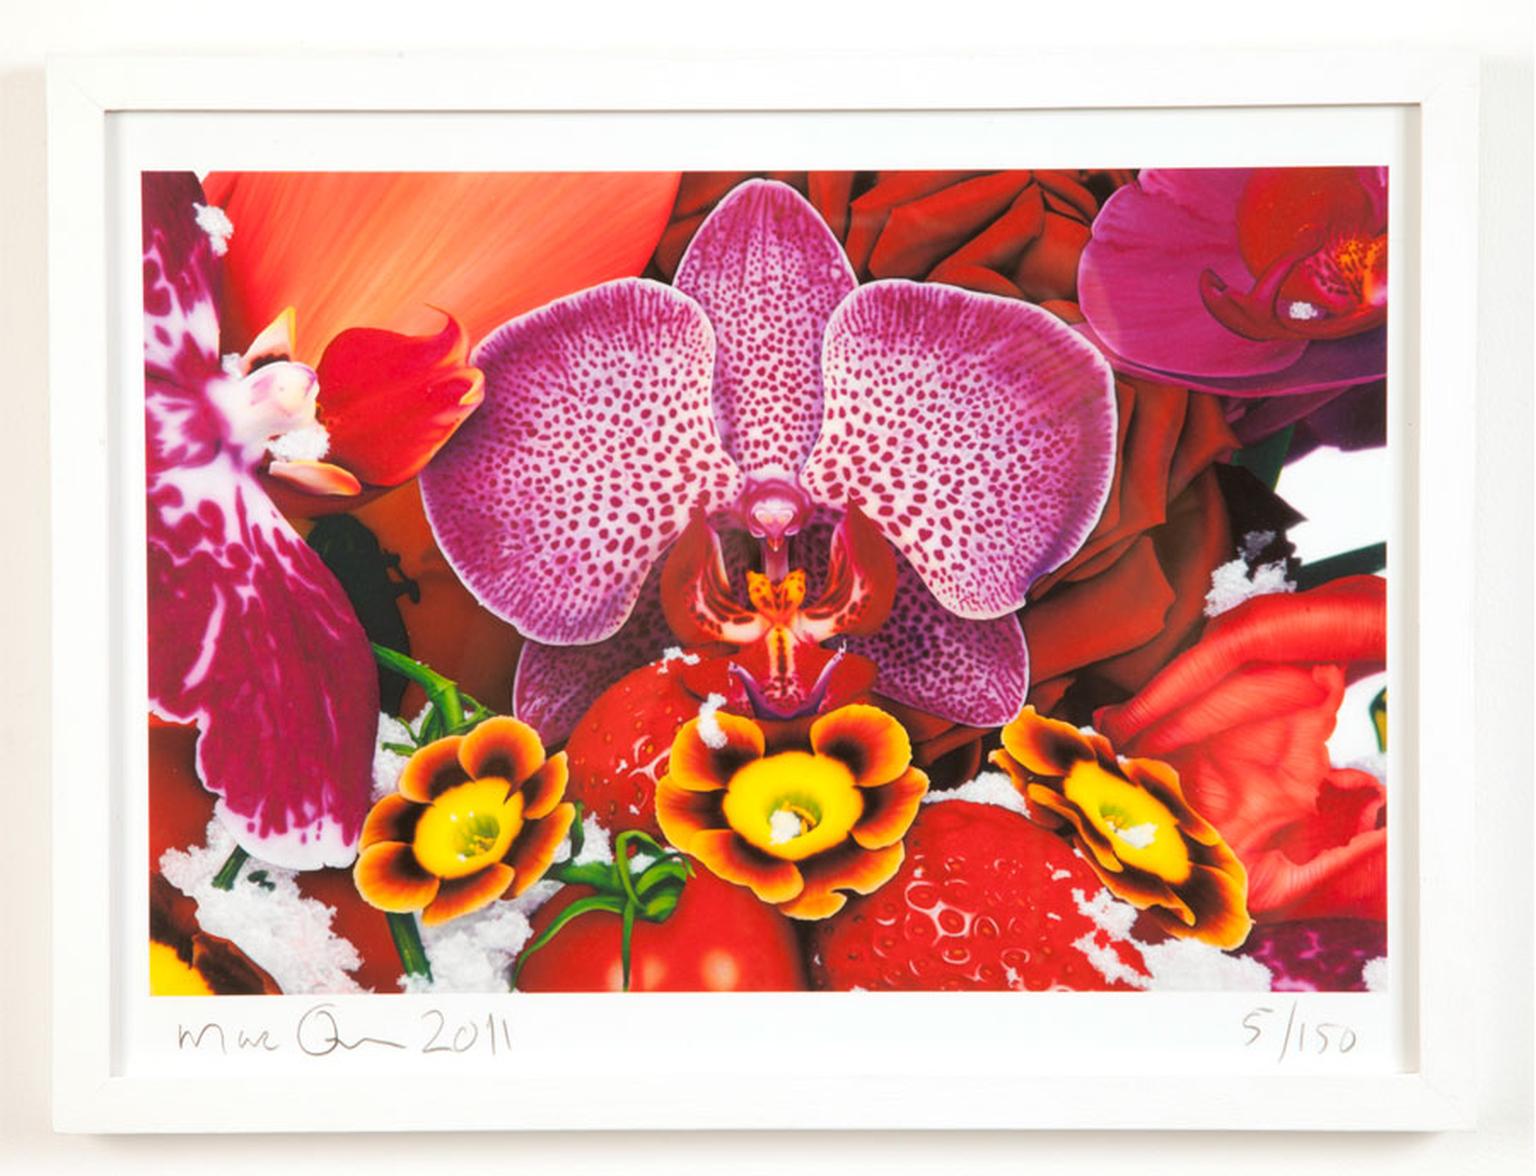 Marc Quinn at Selfridges Limited-edition print Kashi Edition Framed Price from £370